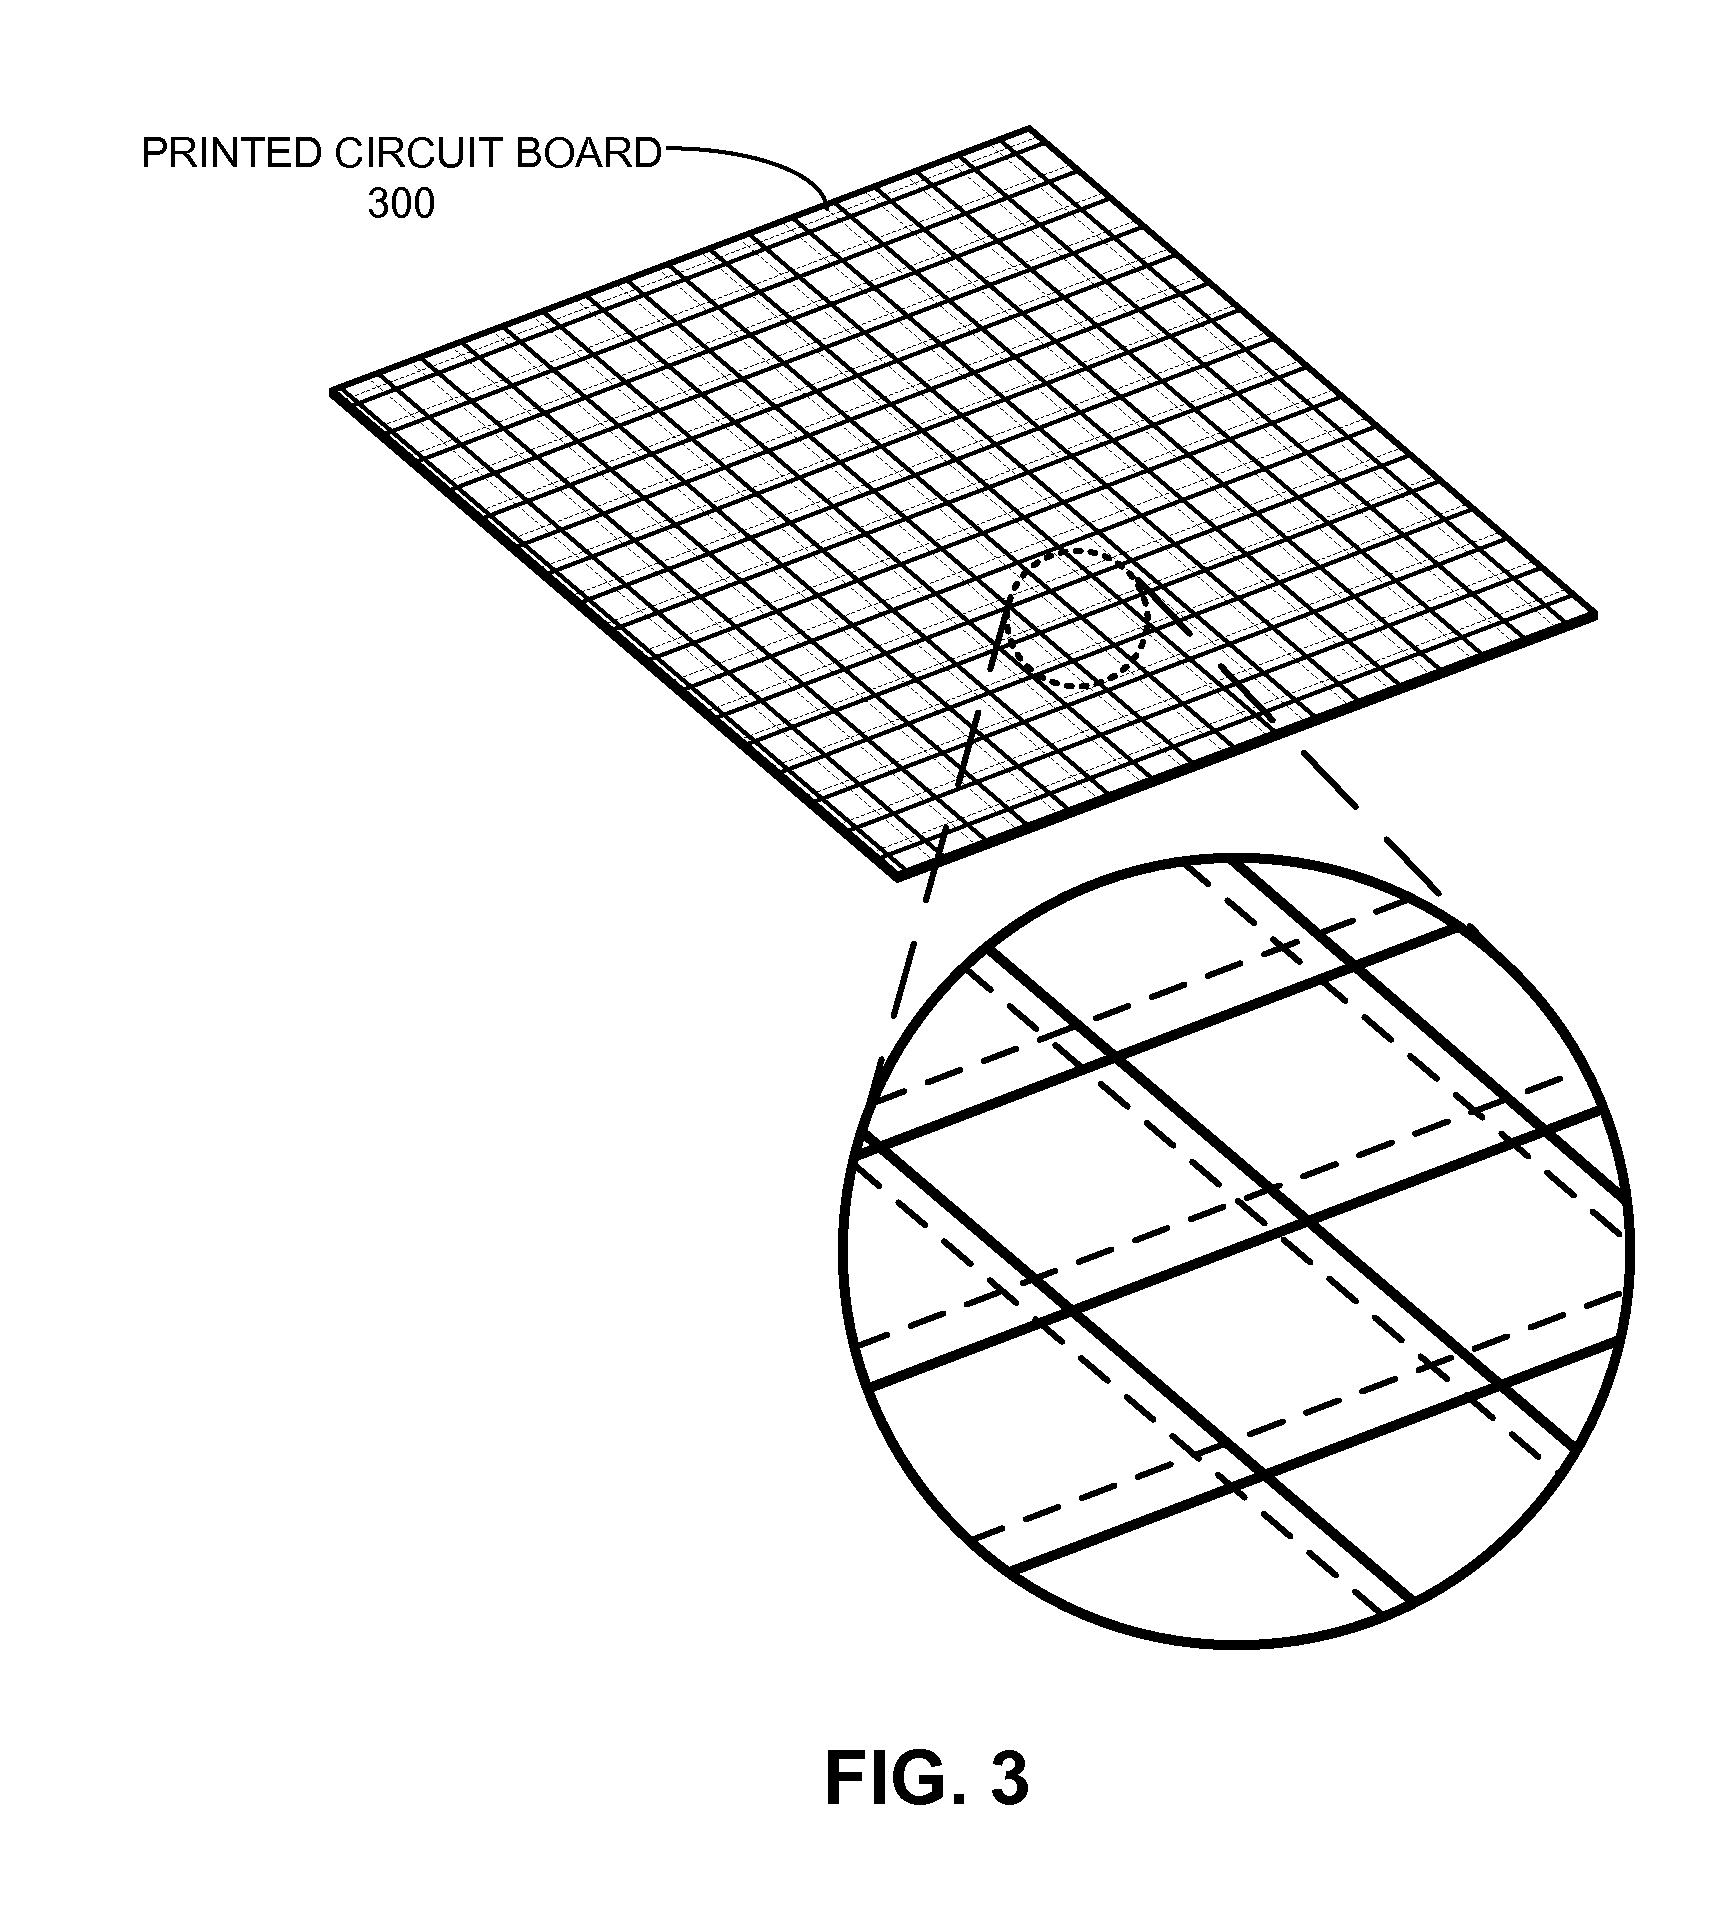 Printed circuit board with low propagation skew between signal traces